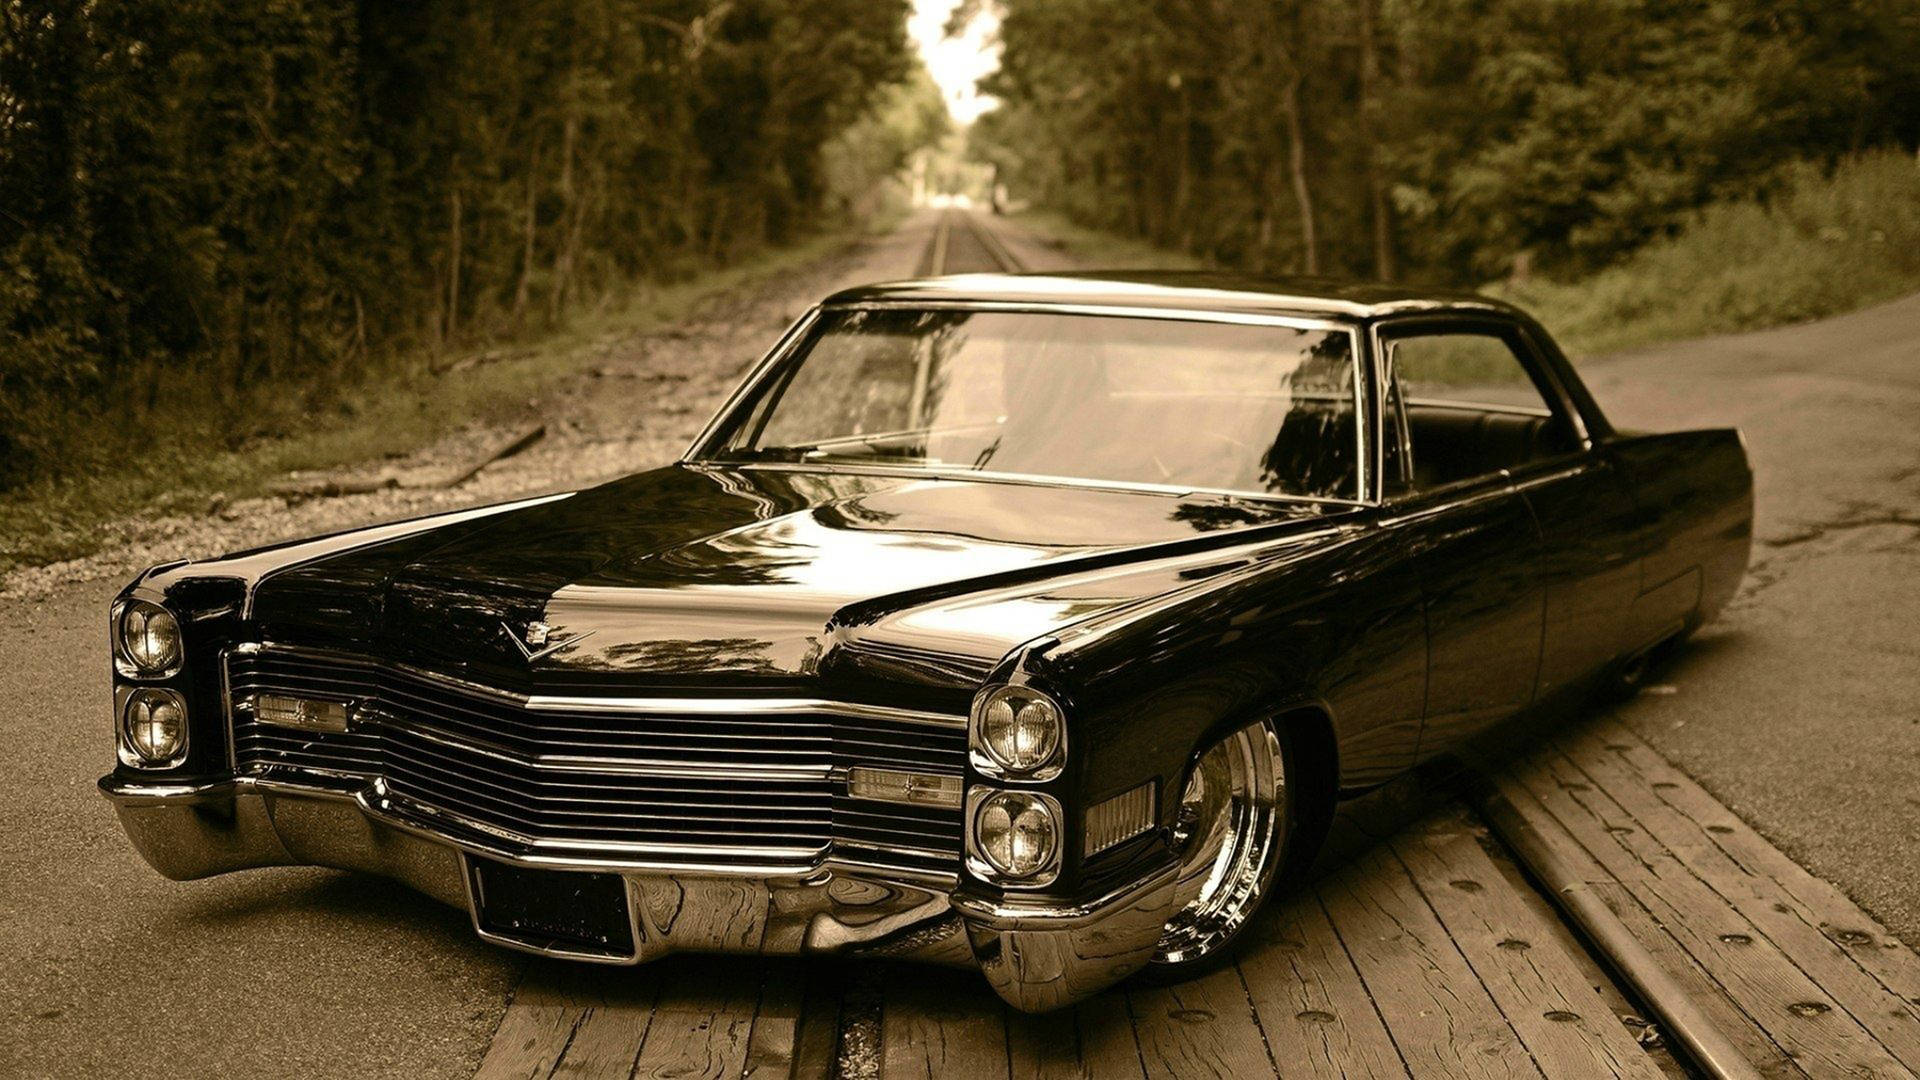 Shimmering Classic - The 1967 Chevrolet Impala Background